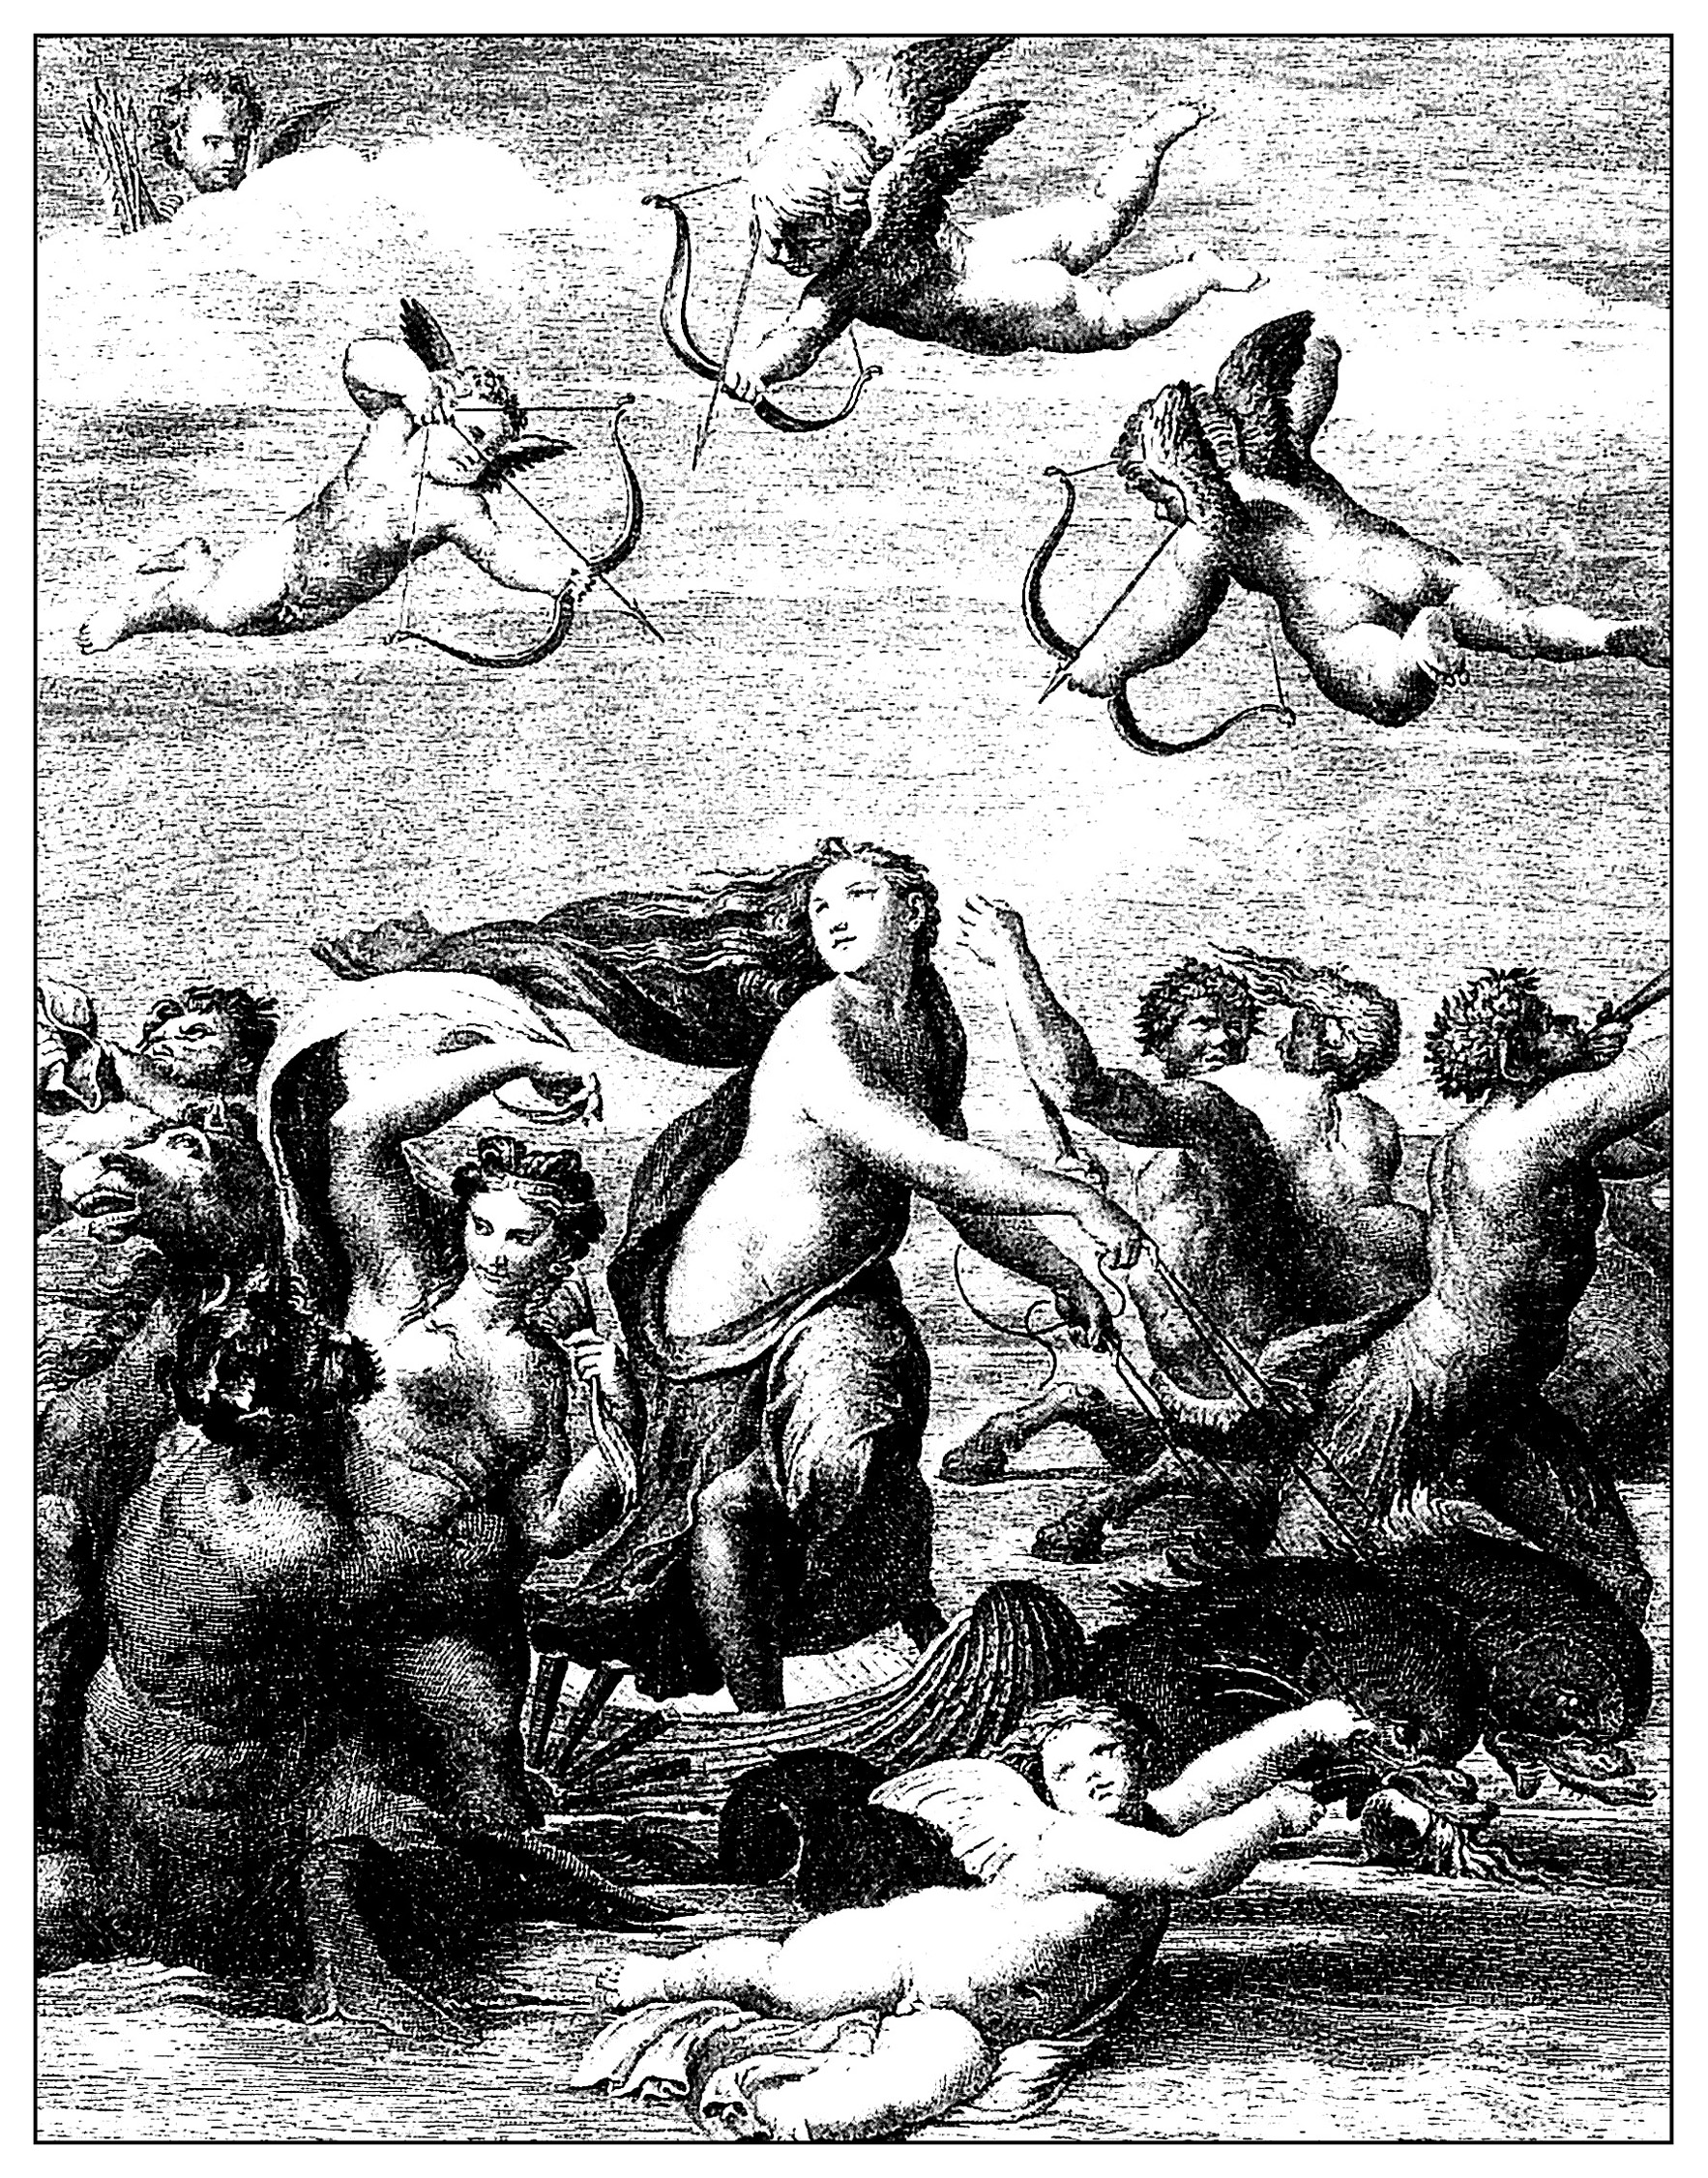 Engraving by Domenico Cunego (1771)